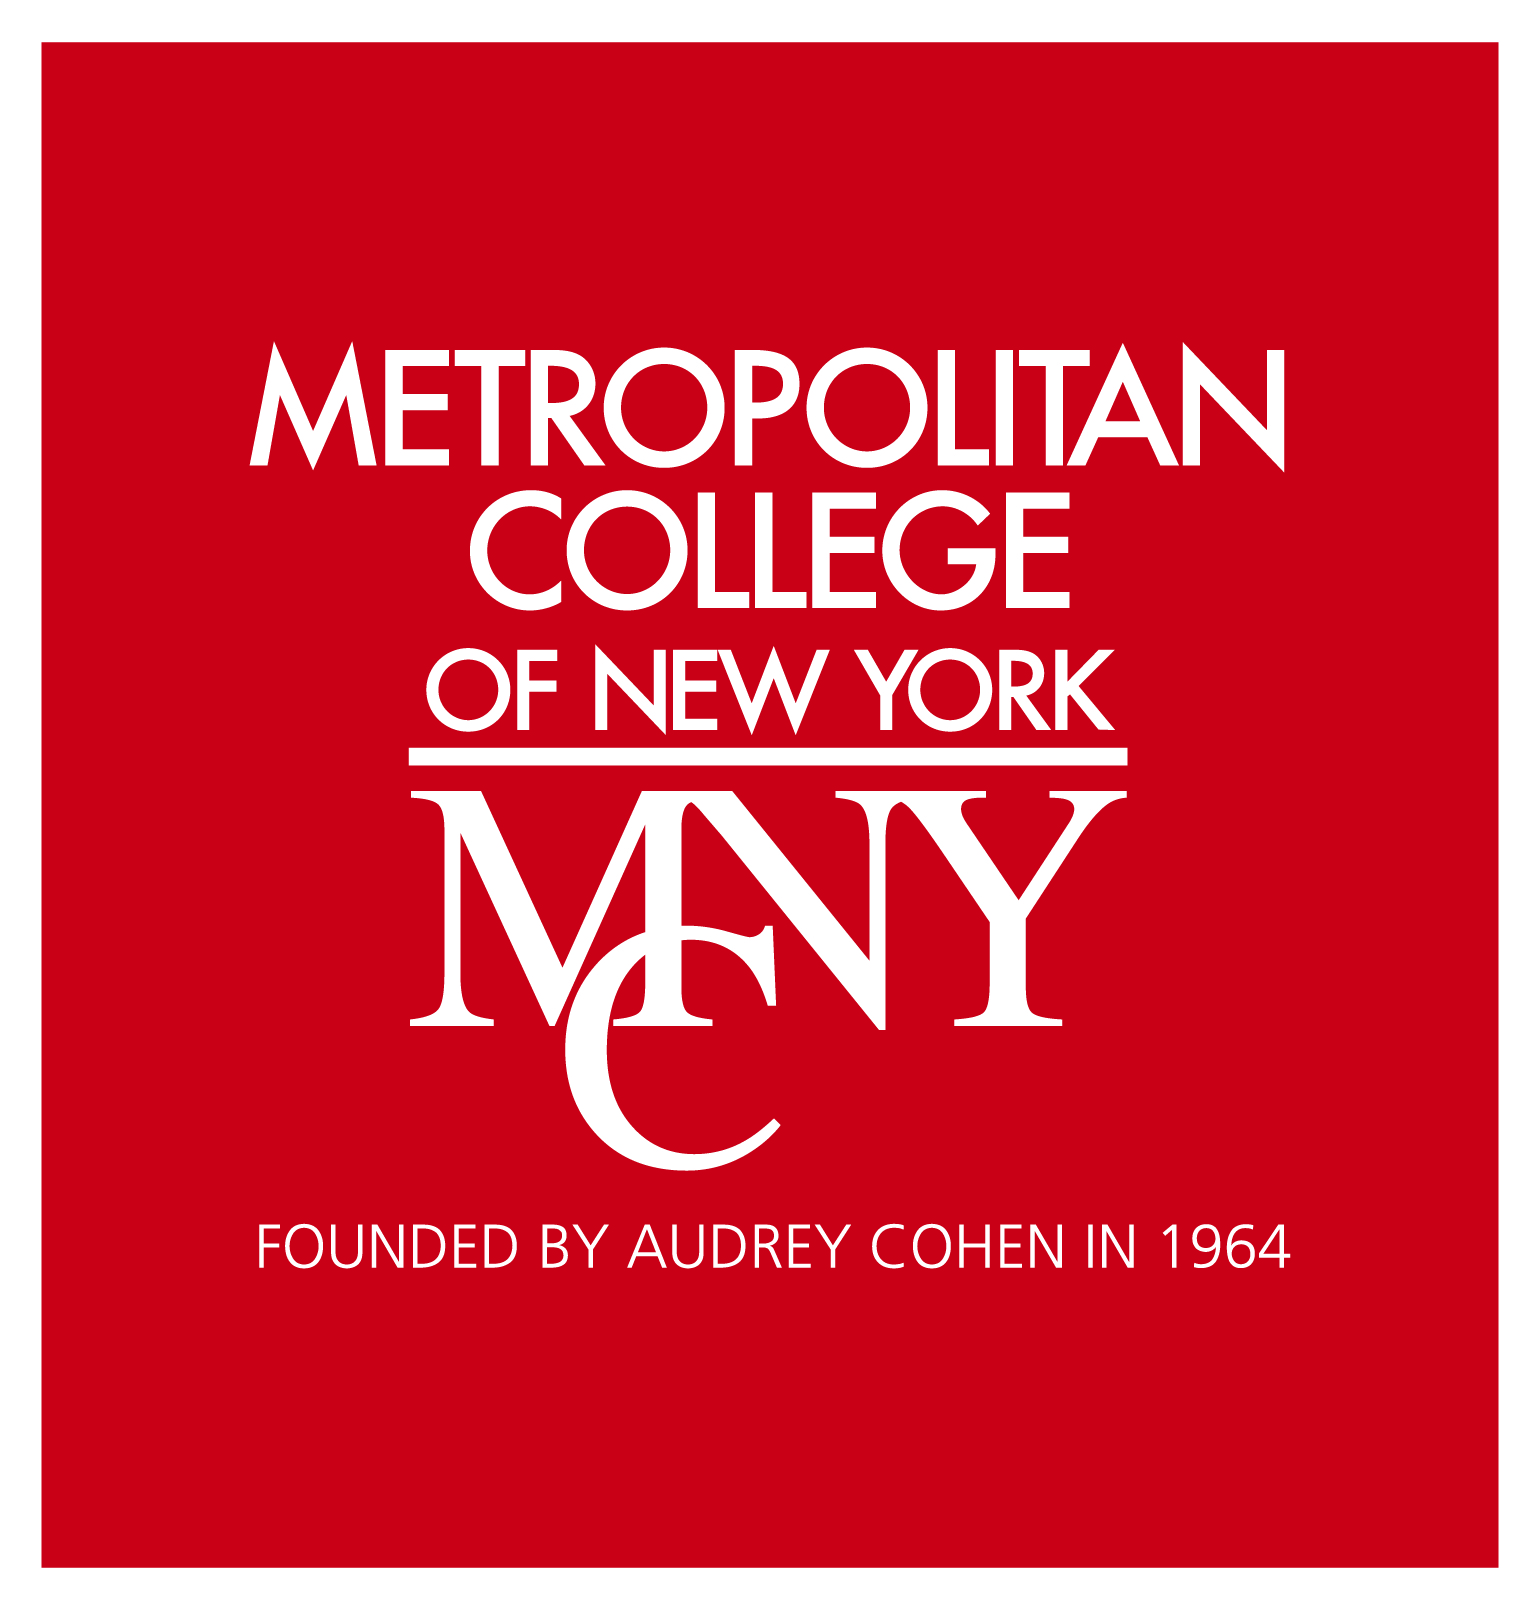 Image is the MCNY Logo with tagline "Founded by Audrey Cohen in 1964"